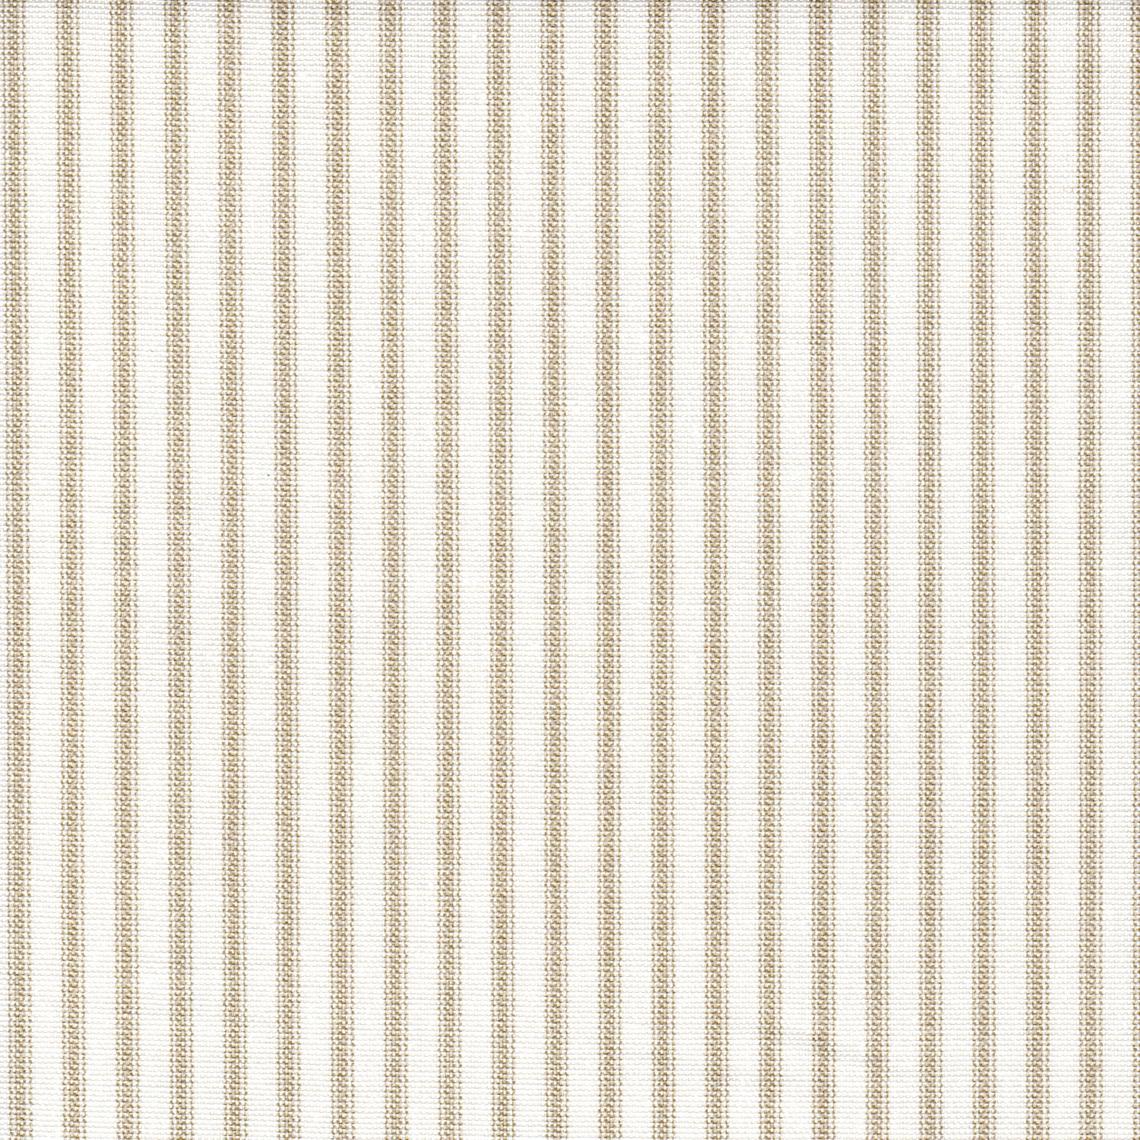 tailored crib skirt in farmhouse sand beige traditional ticking stripe